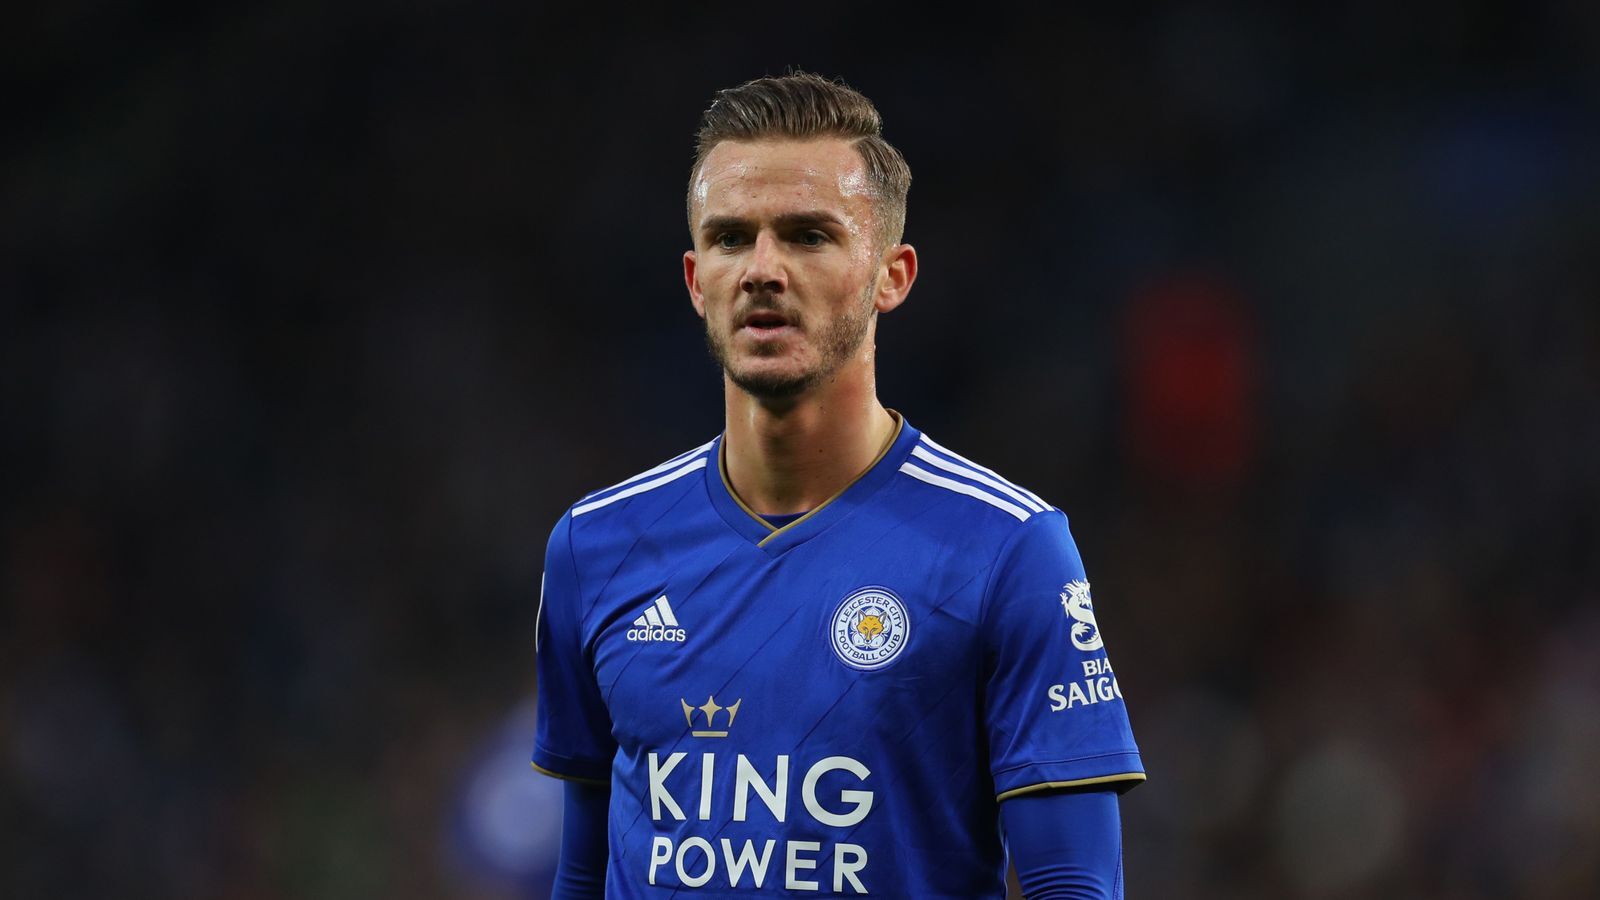 Leicester City Players Maddison, Chilwell, and Fuchs Are Out for the Season